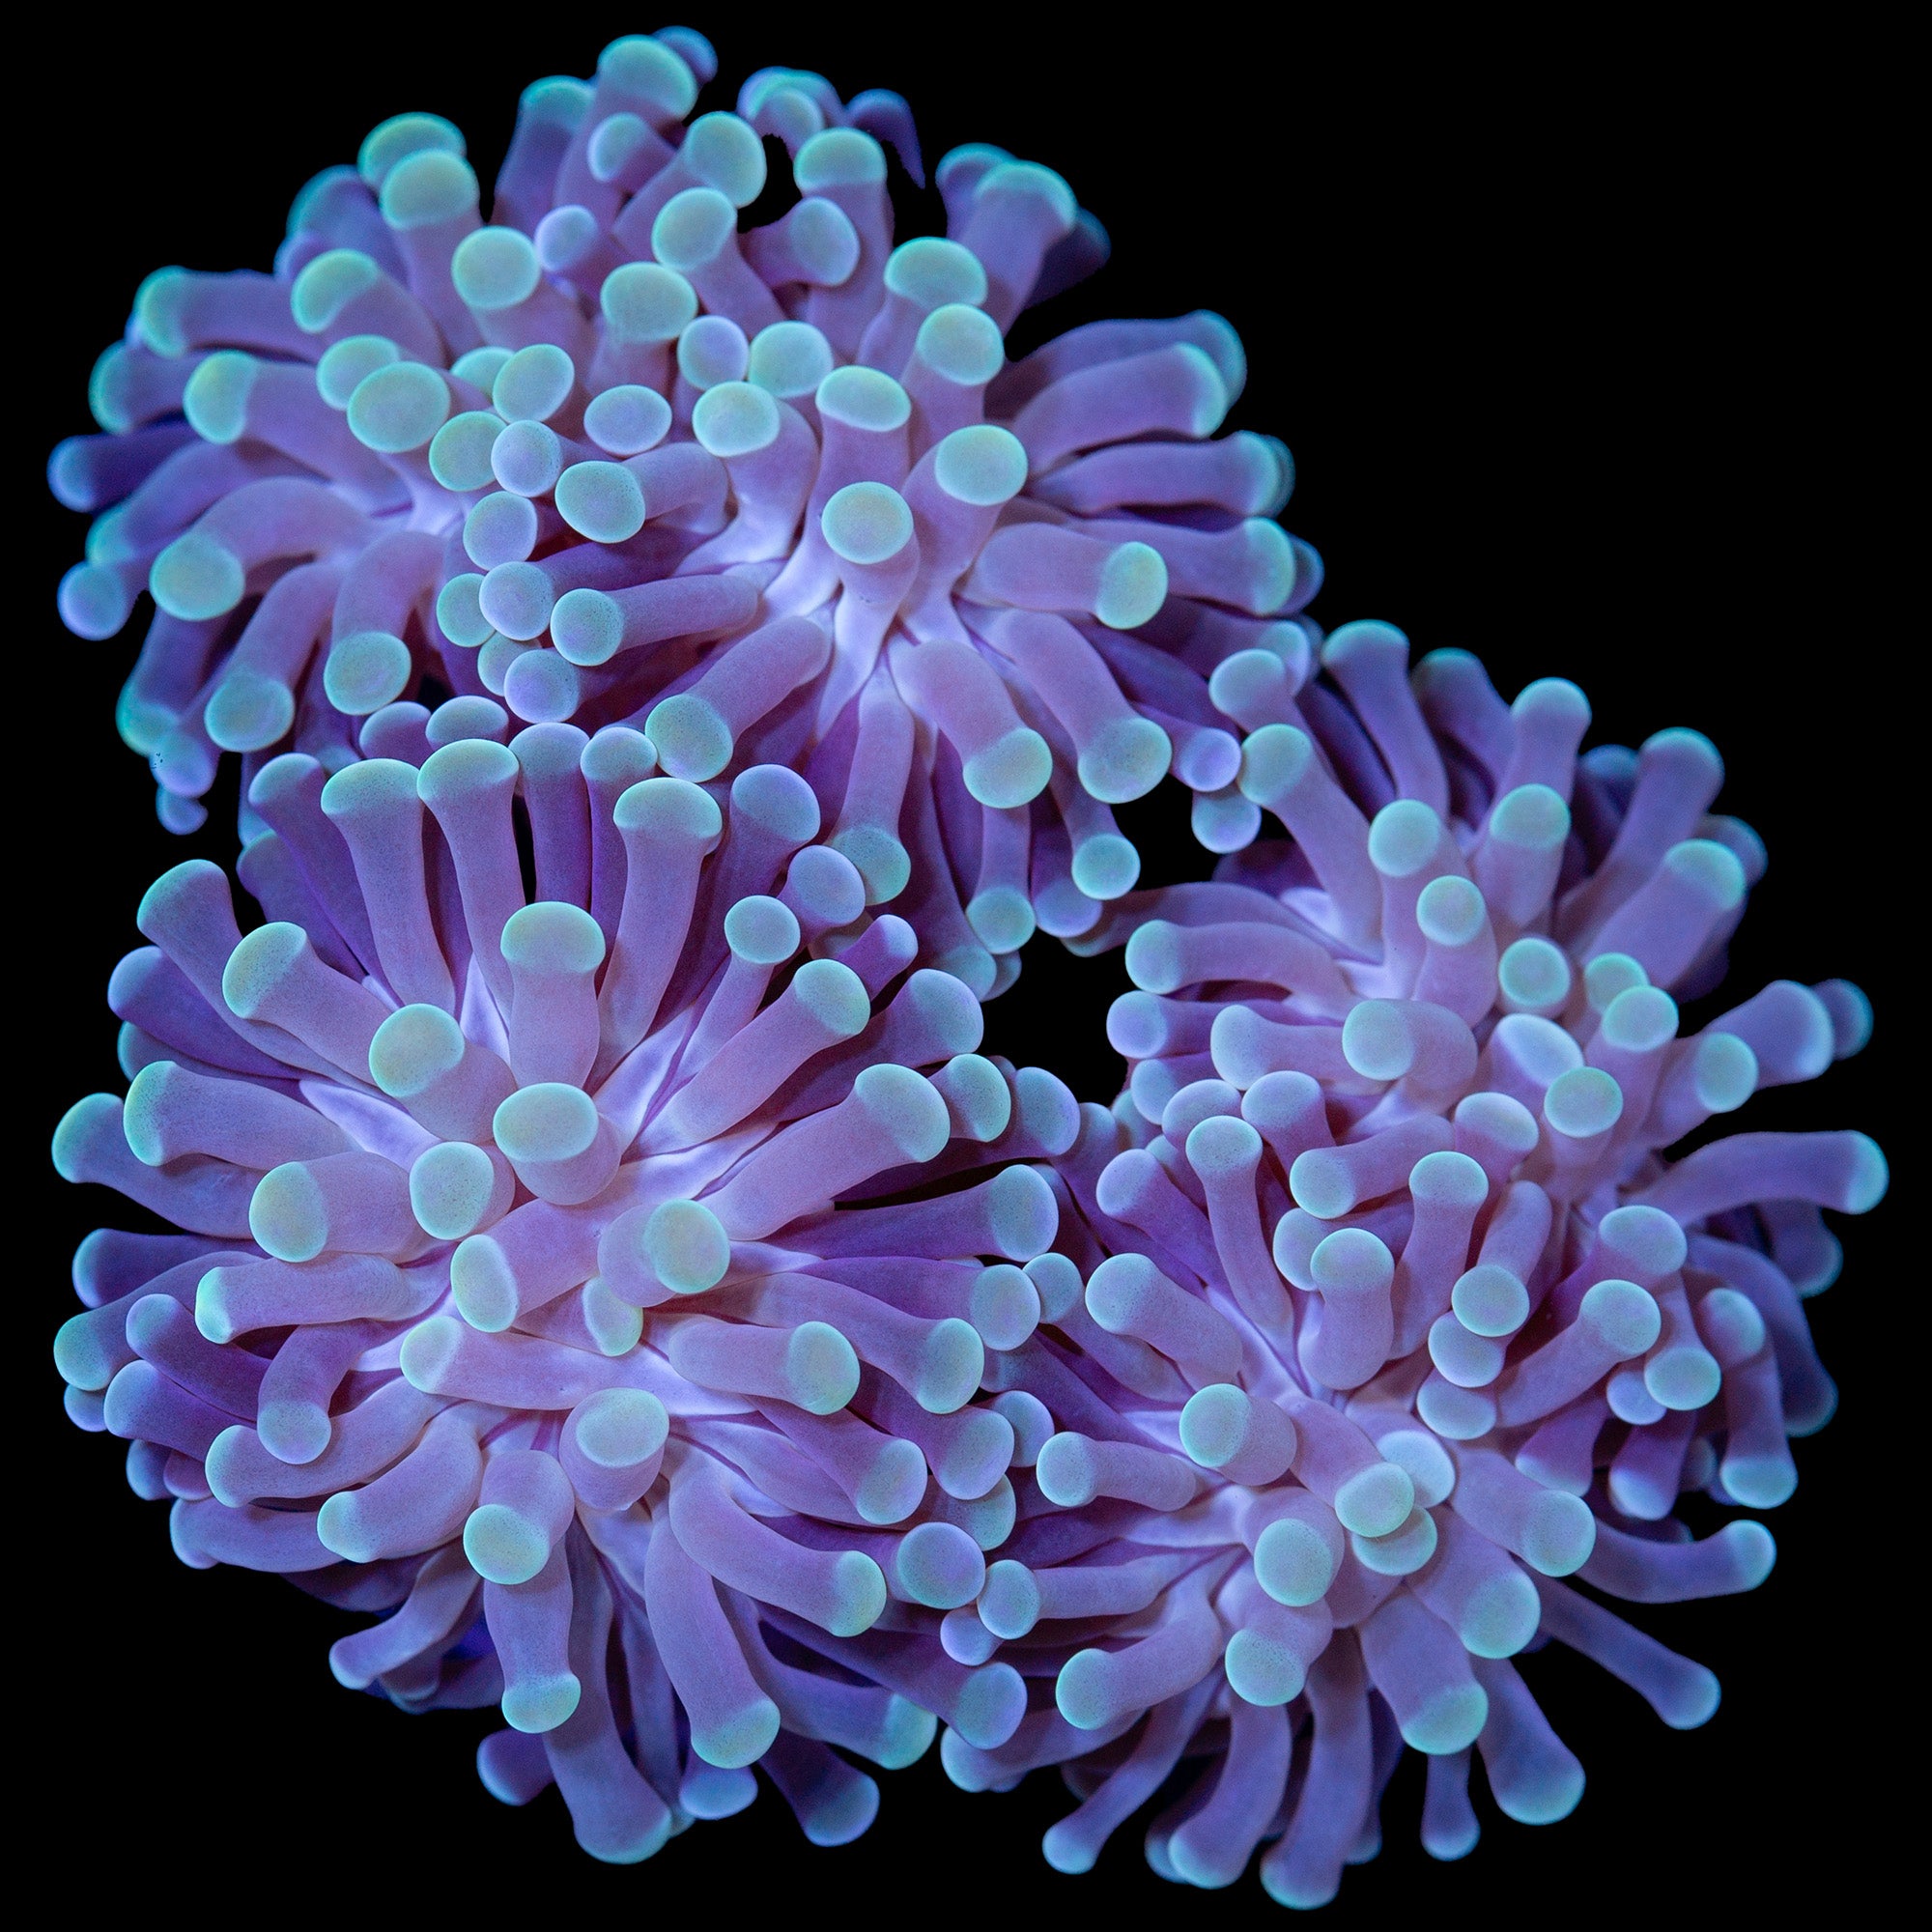 Green Tip Torch Coral Colony